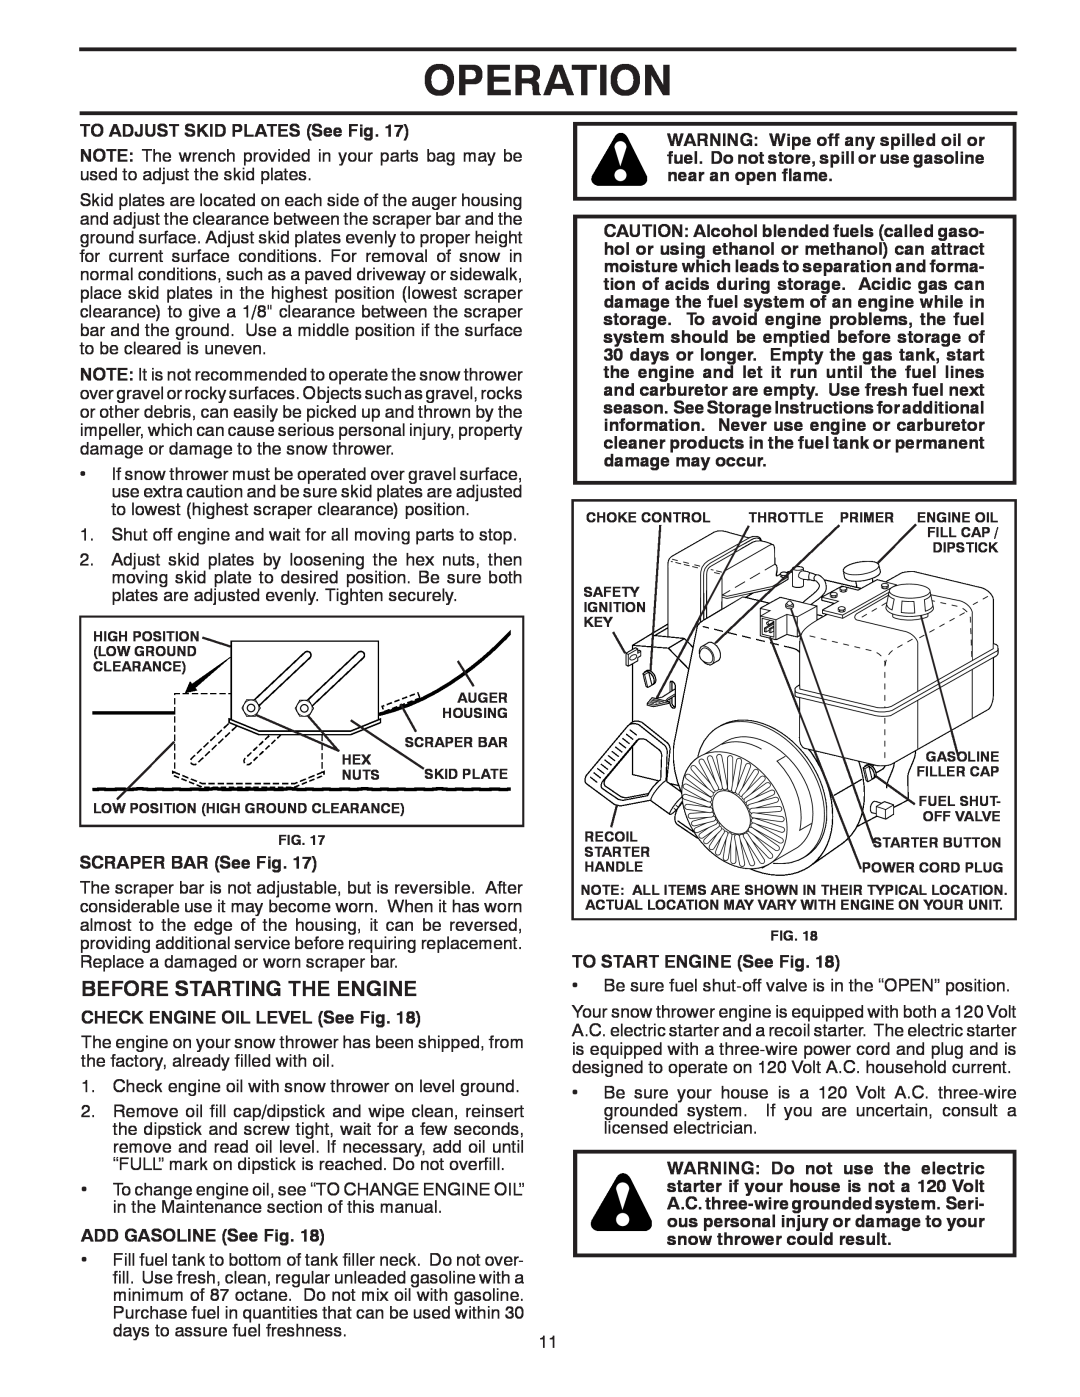 Poulan 961980025, 424714 Before Starting The Engine, Operation, TO ADJUST SKID PLATES See Fig, SCRAPER BAR See Fig 